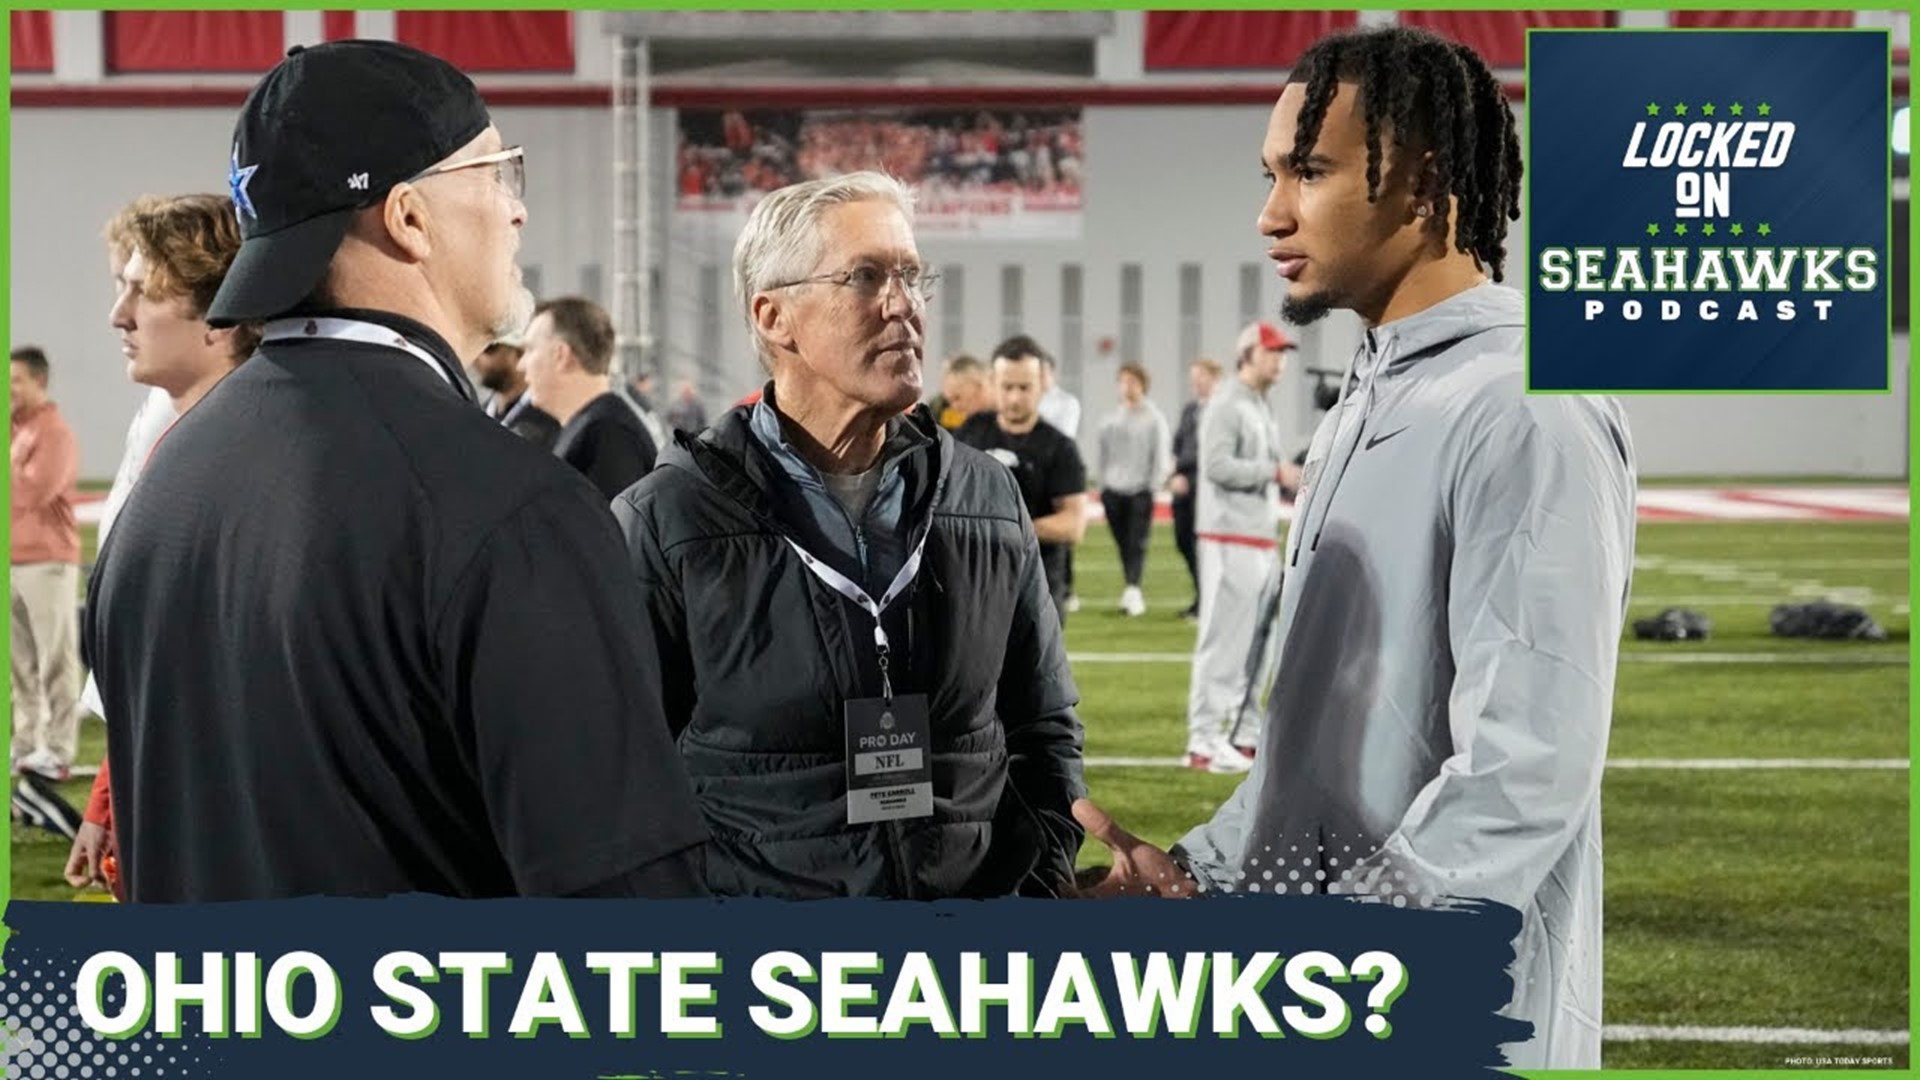 With pro days taking place across the country and a little over a month until the 2023 NFL Draft, the Seahawks didn't spare expense sending people to Ohio State